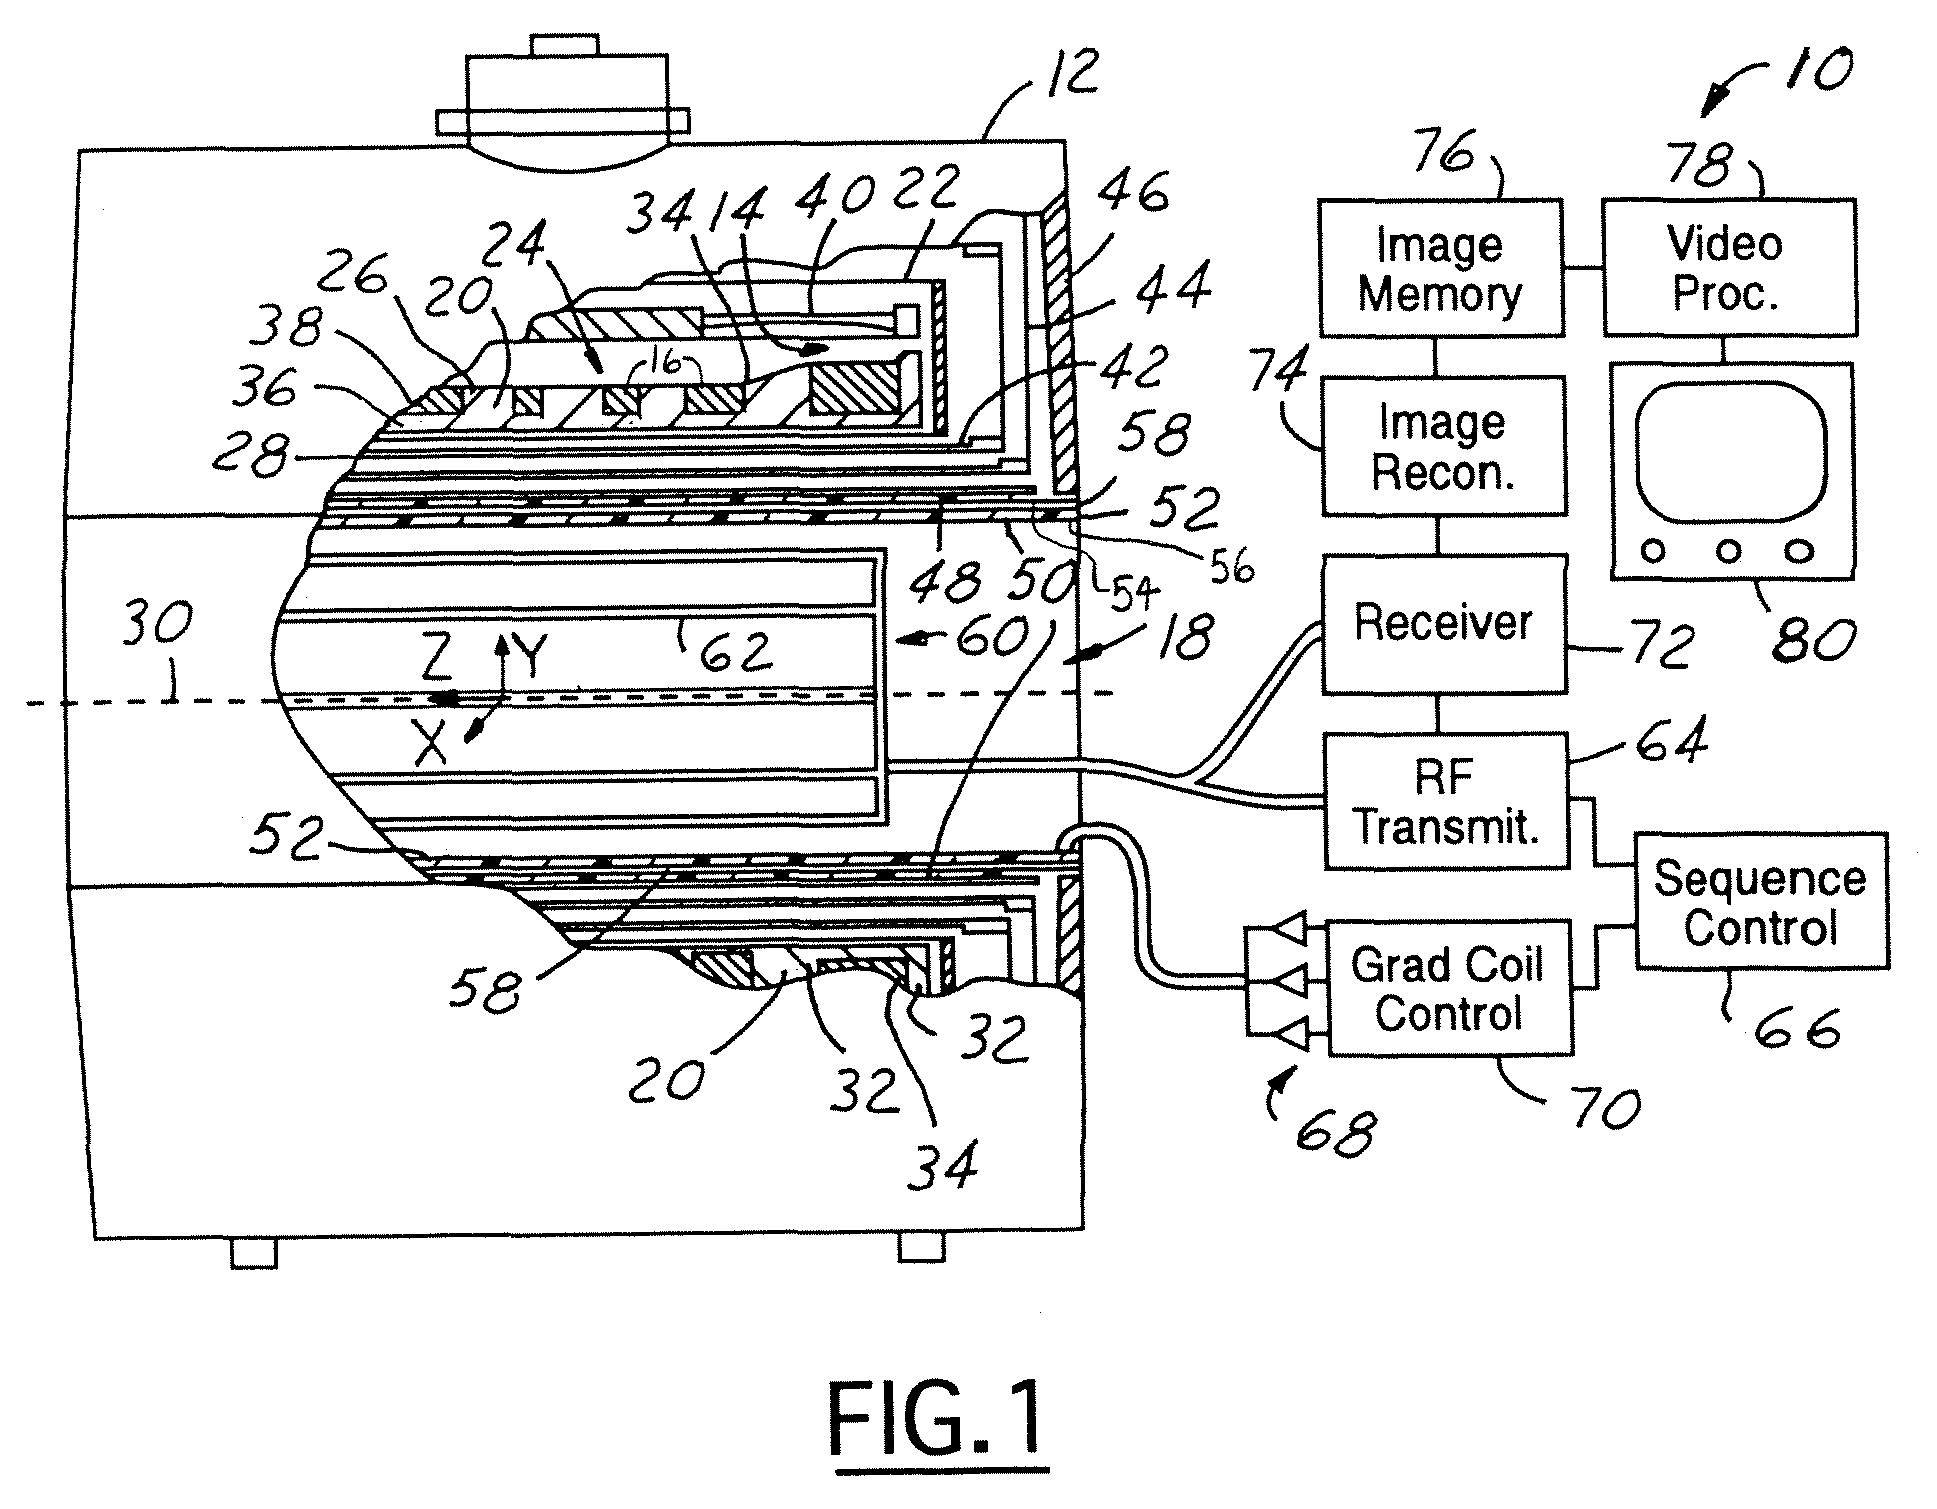 Superconducting magnet coil support structure